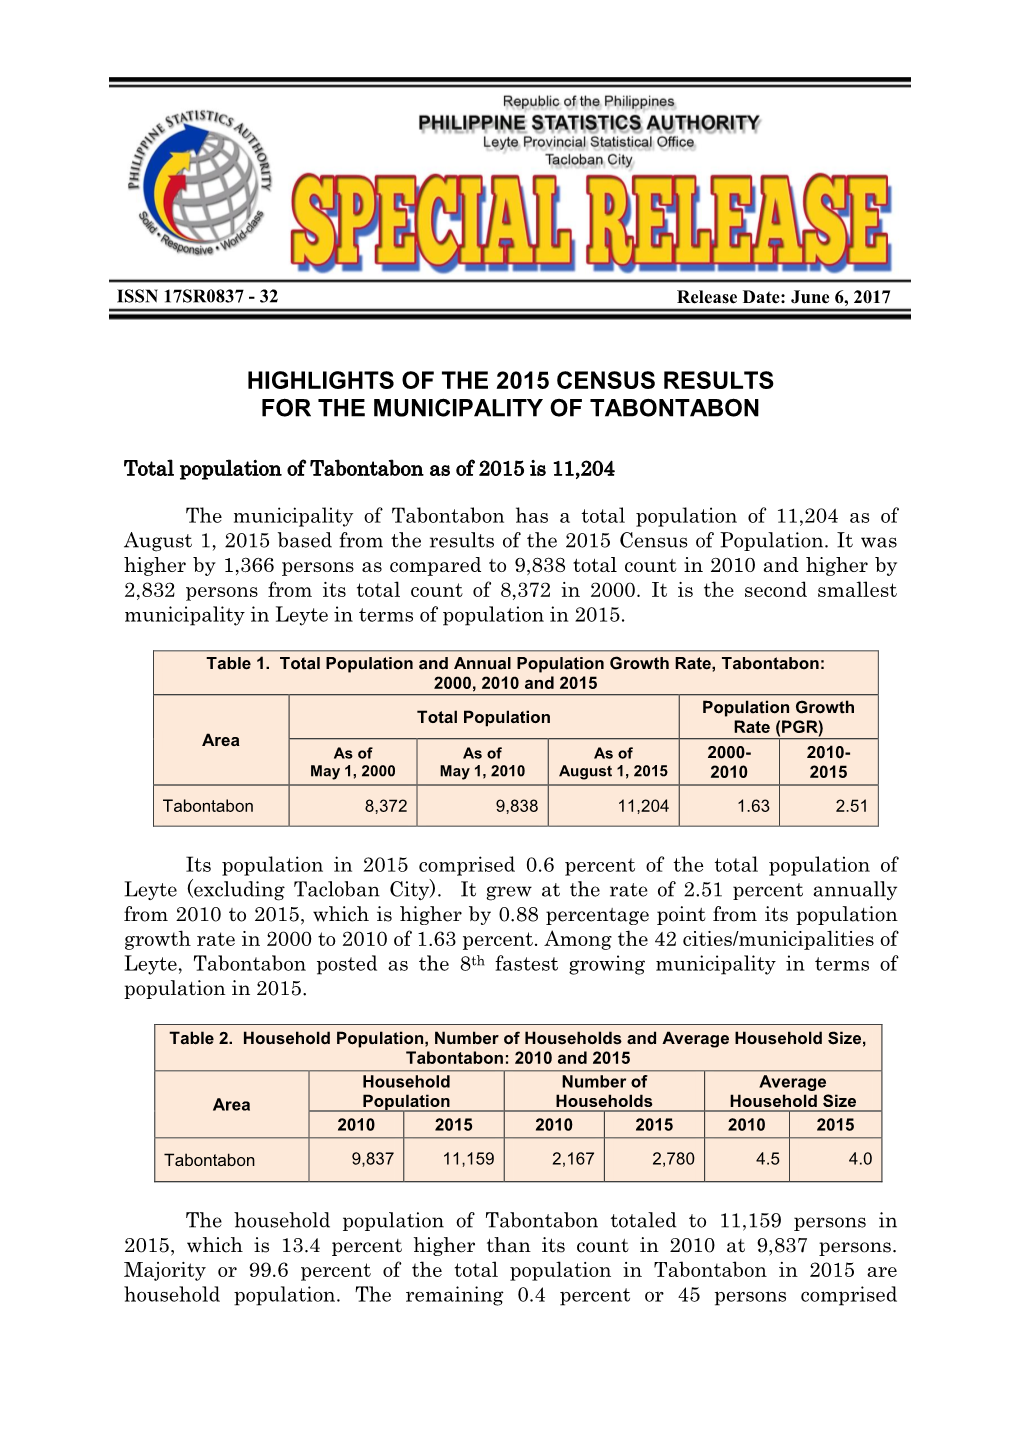 Highlights of the 2015 Census Results for the Municipality of Tabontabon